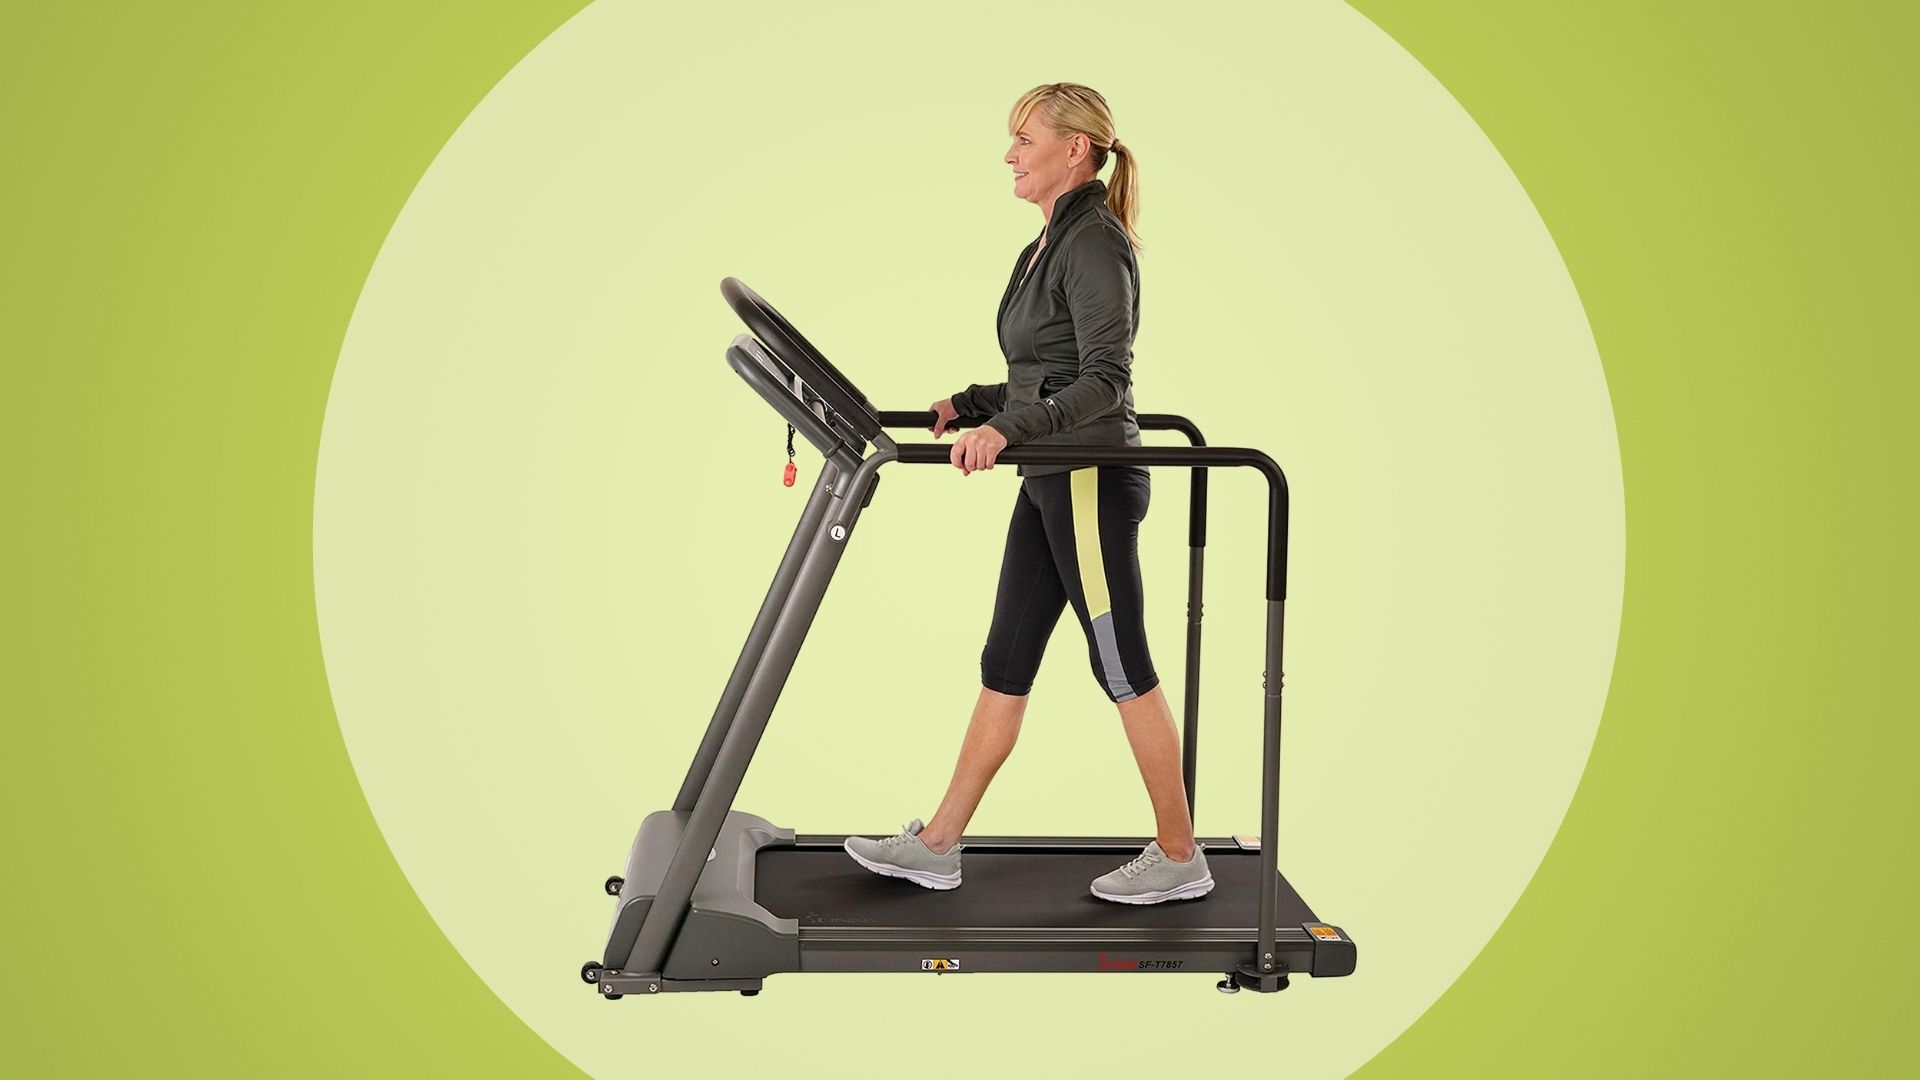 Woodtree Treadmills for Home Foldable Function Electric Treadmill Fitness Weight-loss Exercise Equipment Indoor Fitness Ultra-Quiet Models Running Machine 